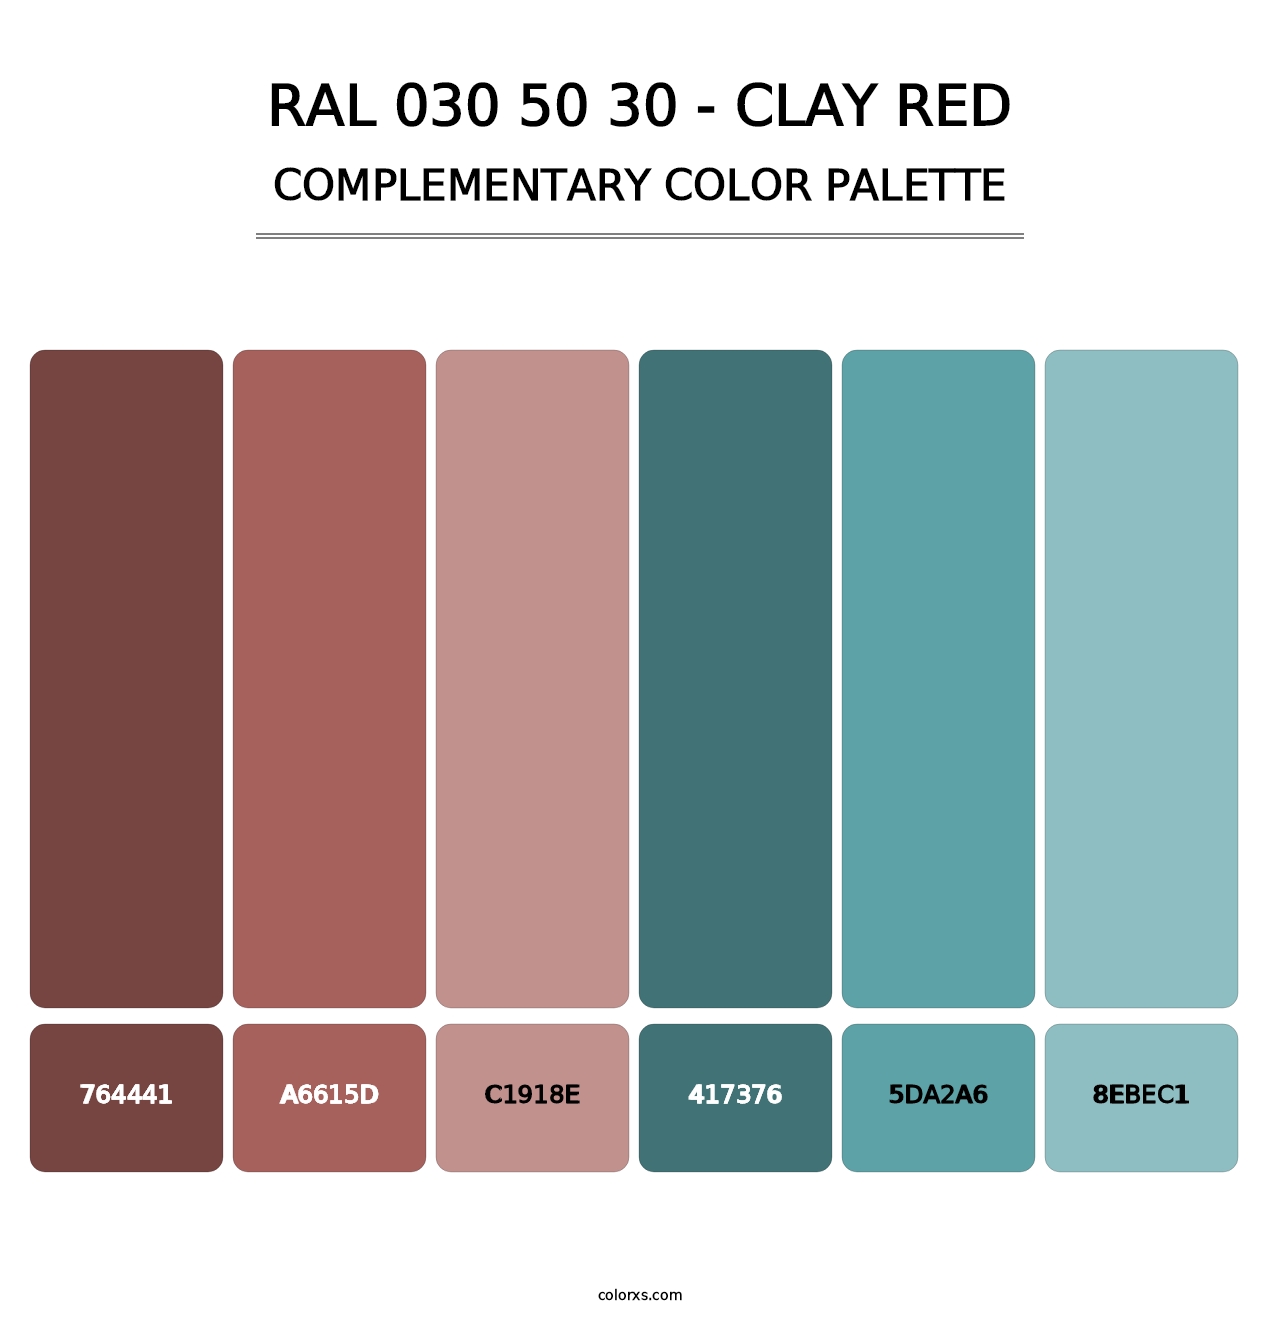 RAL 030 50 30 - Clay Red - Complementary Color Palette